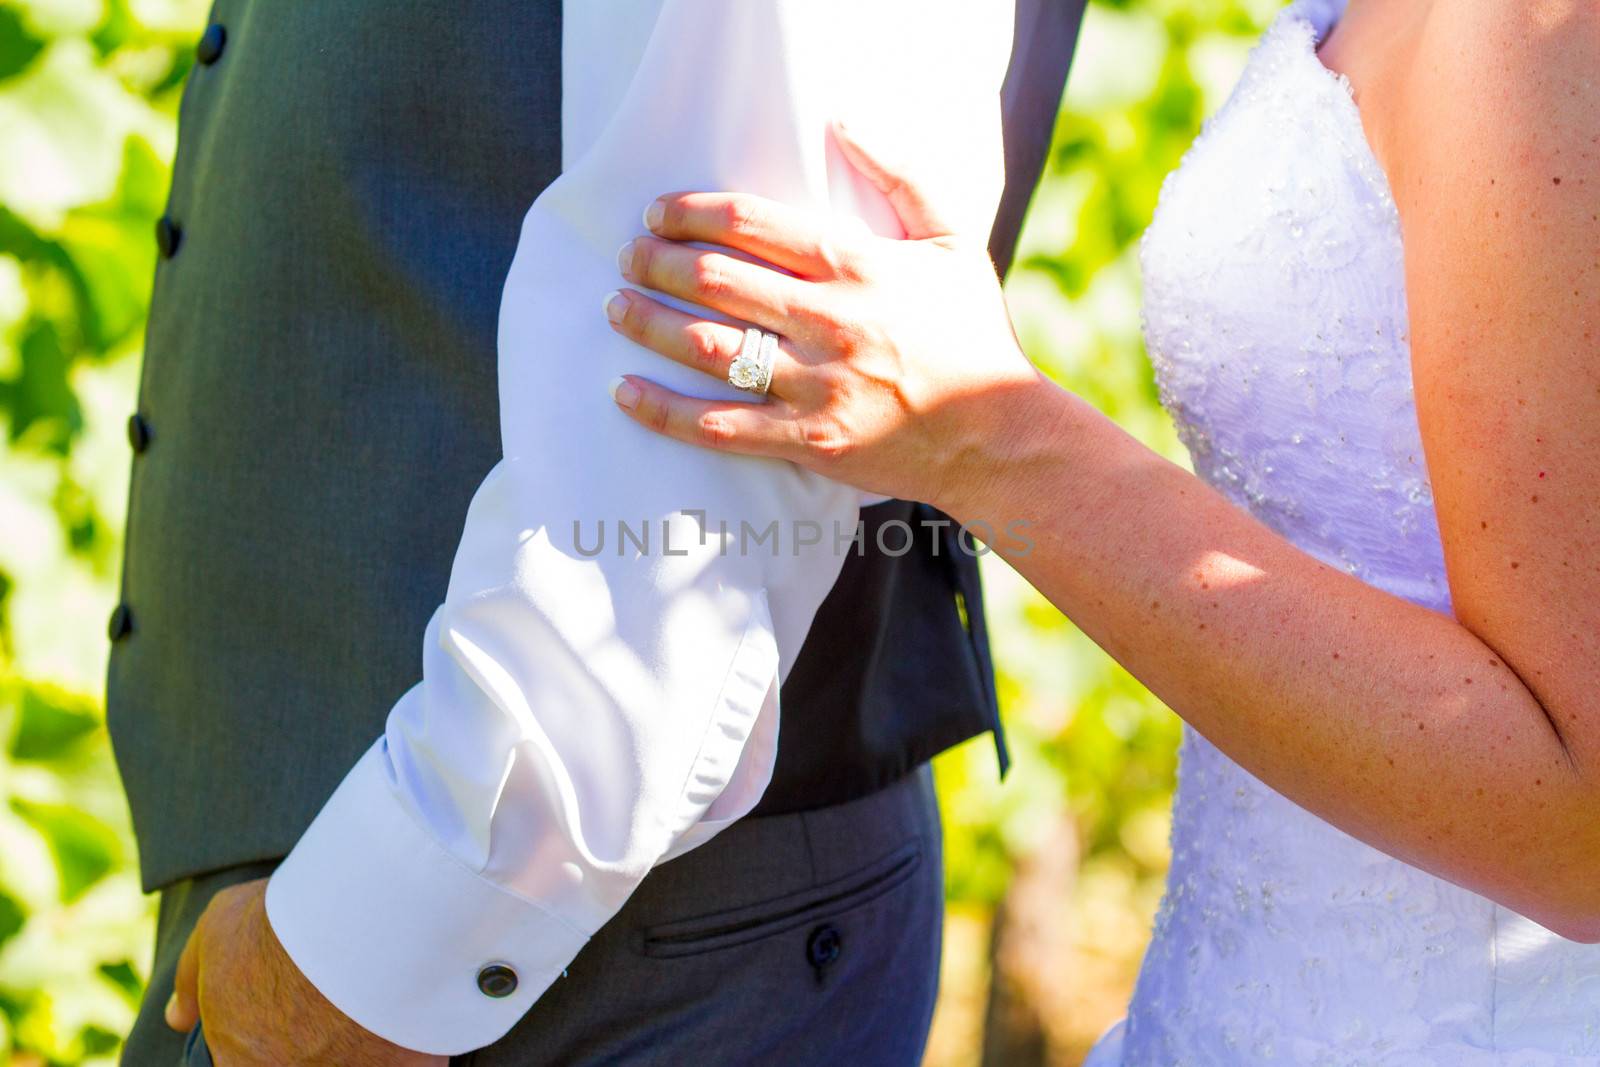 A bride and groom are close together showing just their torso arms and hands while holding each other after their wedding.